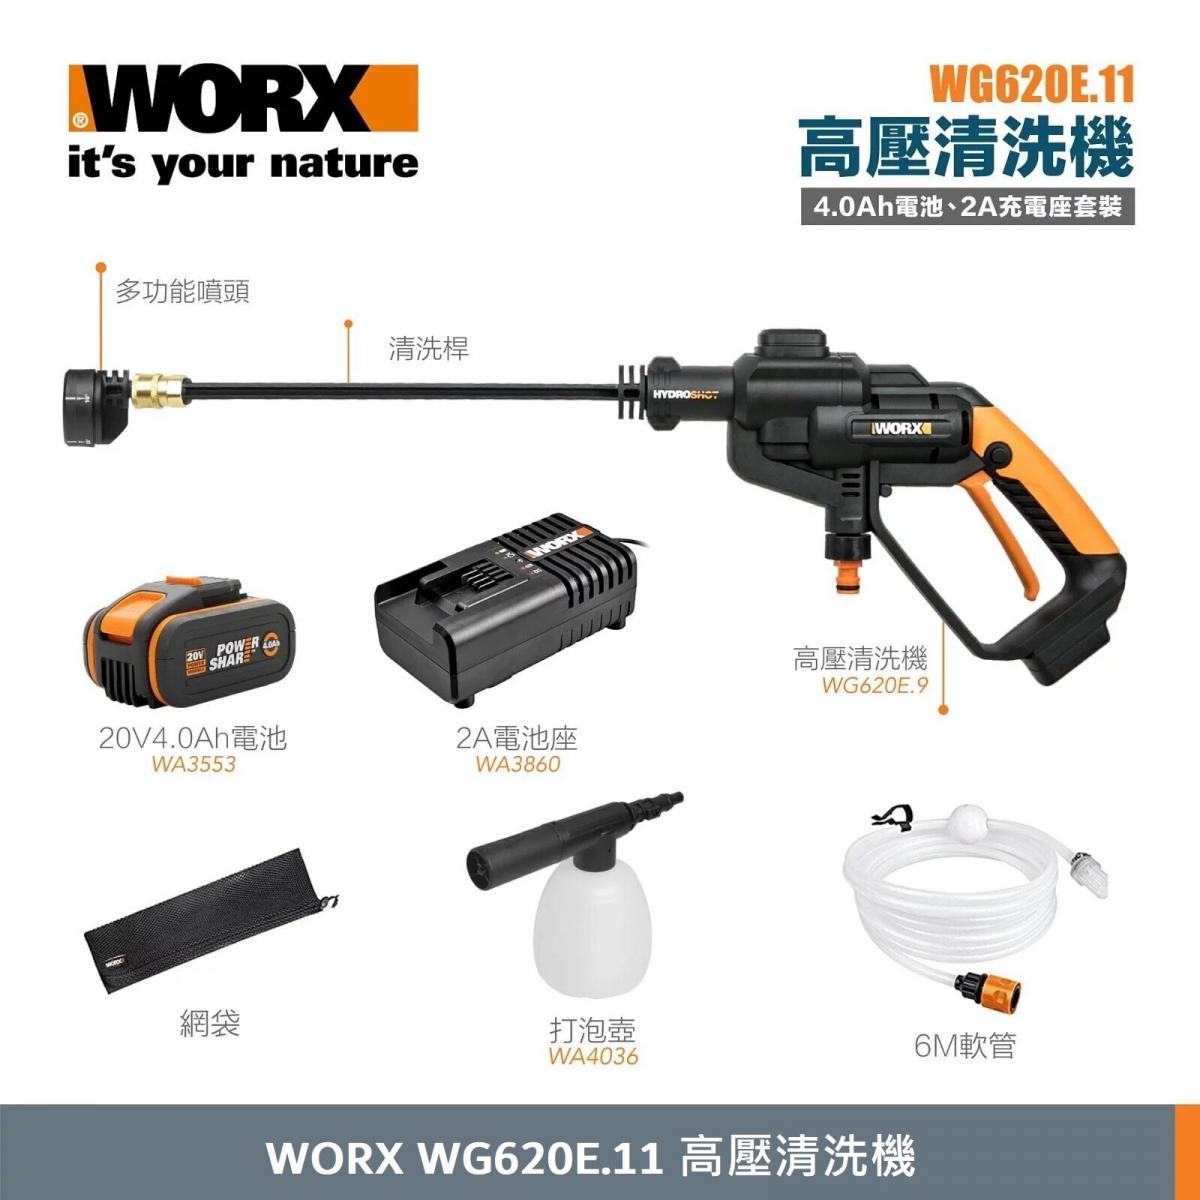 WORX - WG620E.11 high-pressure washer set (with 20V 4.0Ah battery, 2A charging stand) | Wireless car wash water gun | Brushless high-pressure water gun